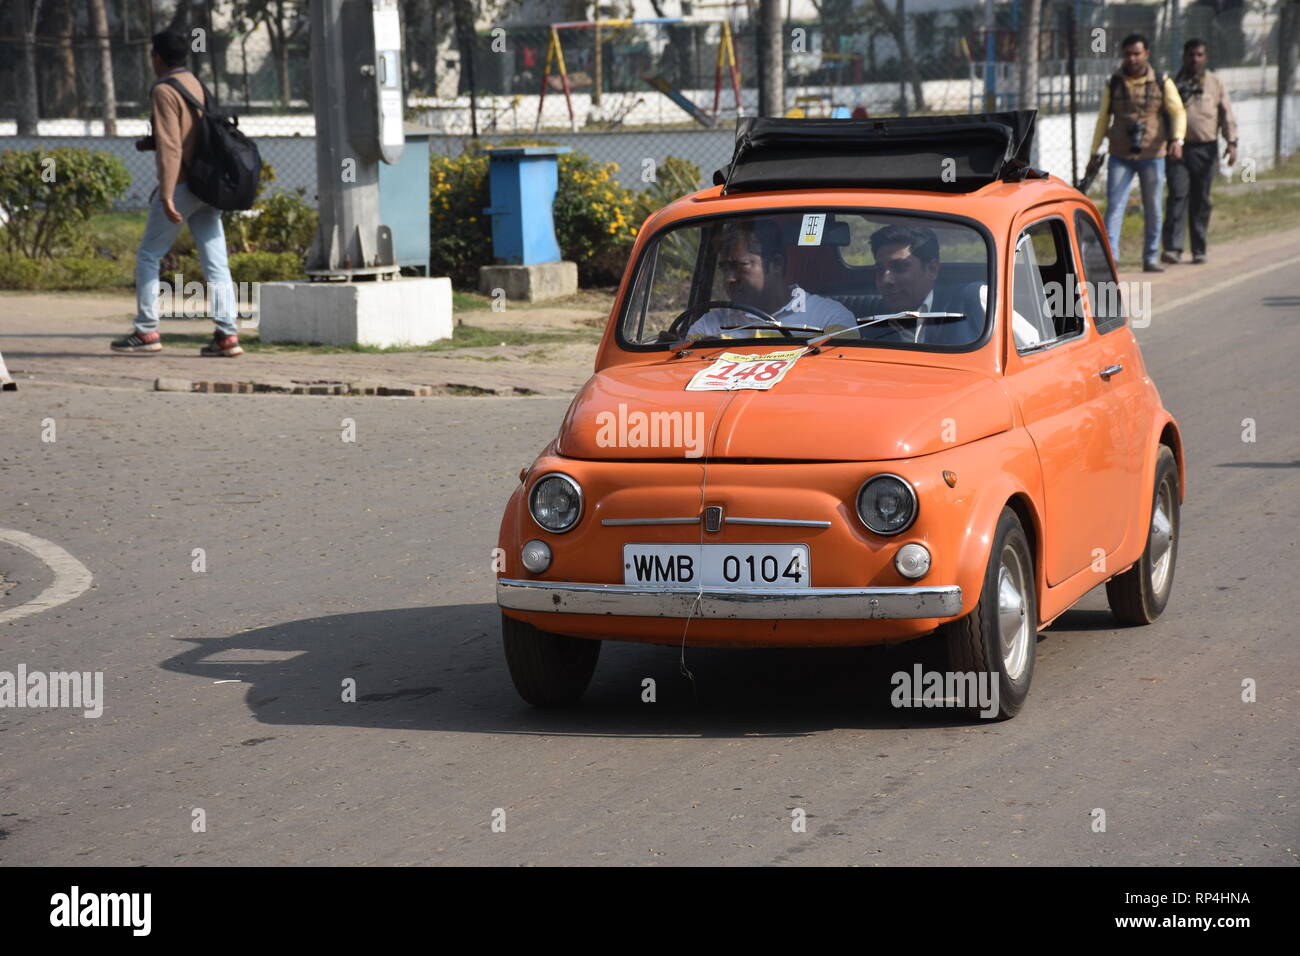 1972 Fiat 500 car with 8 hp engine. WMB 0104 India. Stock Photo